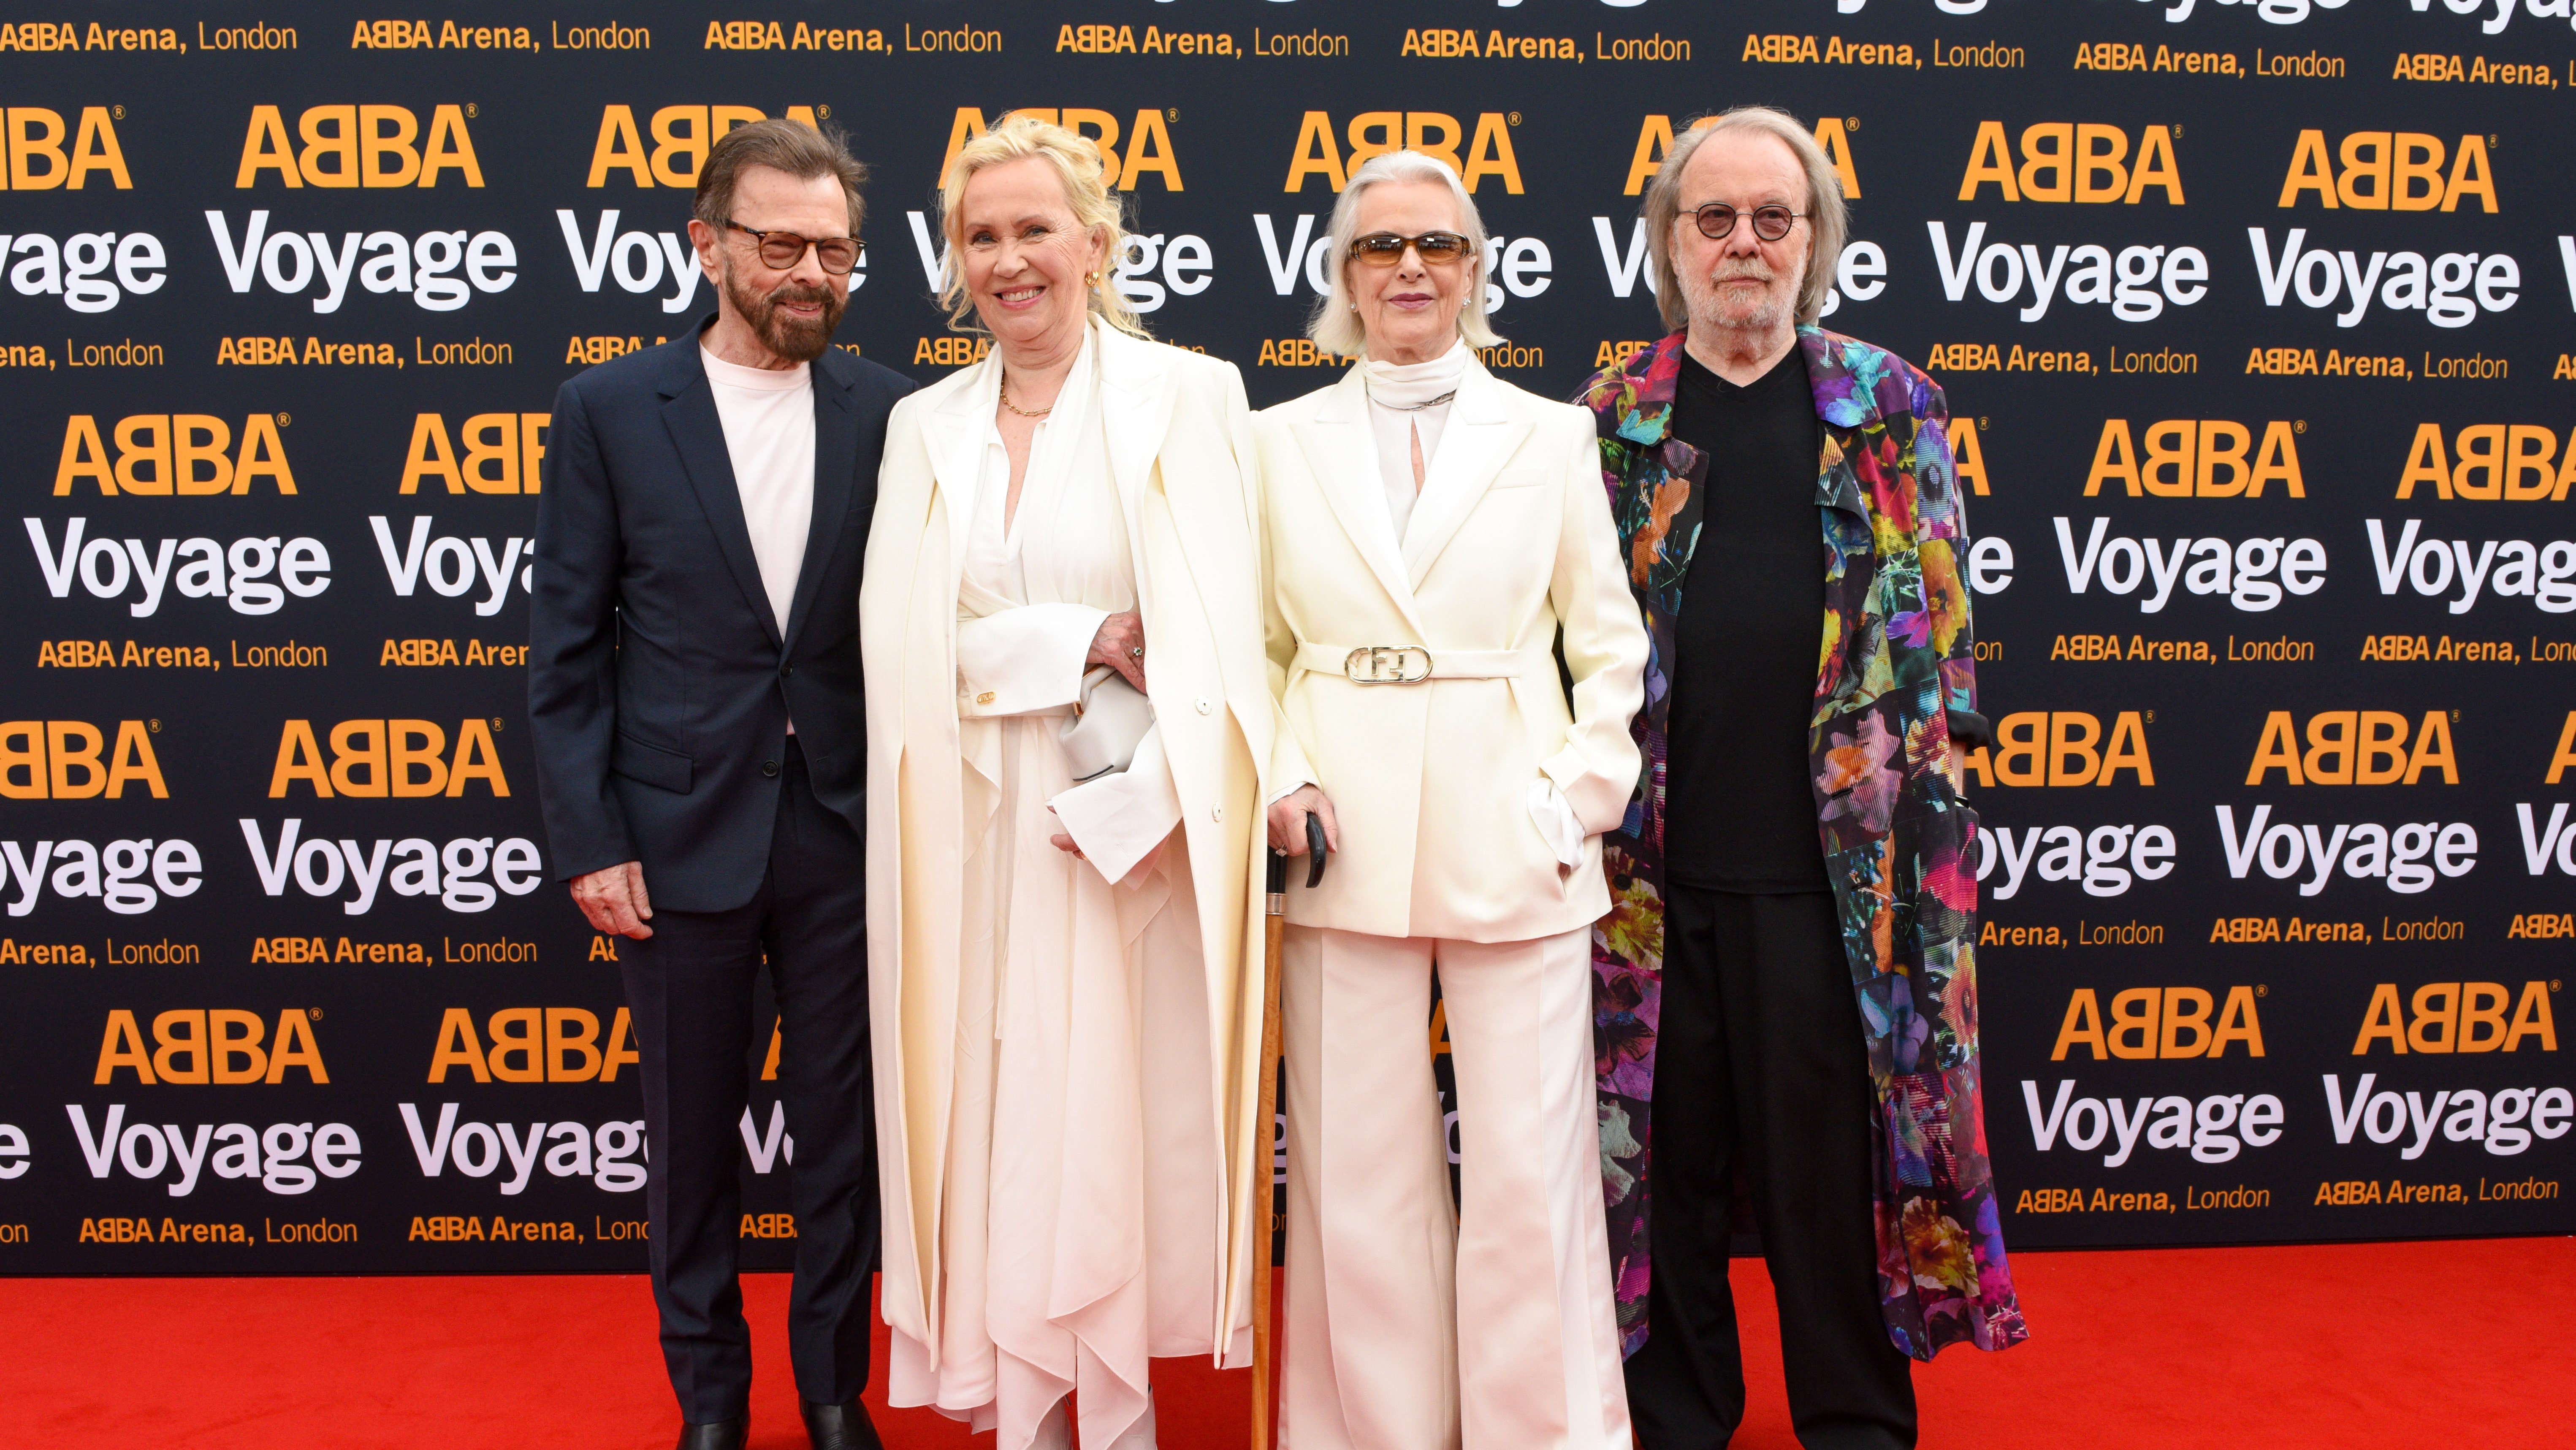 Björn Ulvaeus, Agnetha Fältskog, Anni-Frid Lyngstad and Benny Andersson attend the first performance of ABBA's "Voyage" at ABBA Arena in 2022